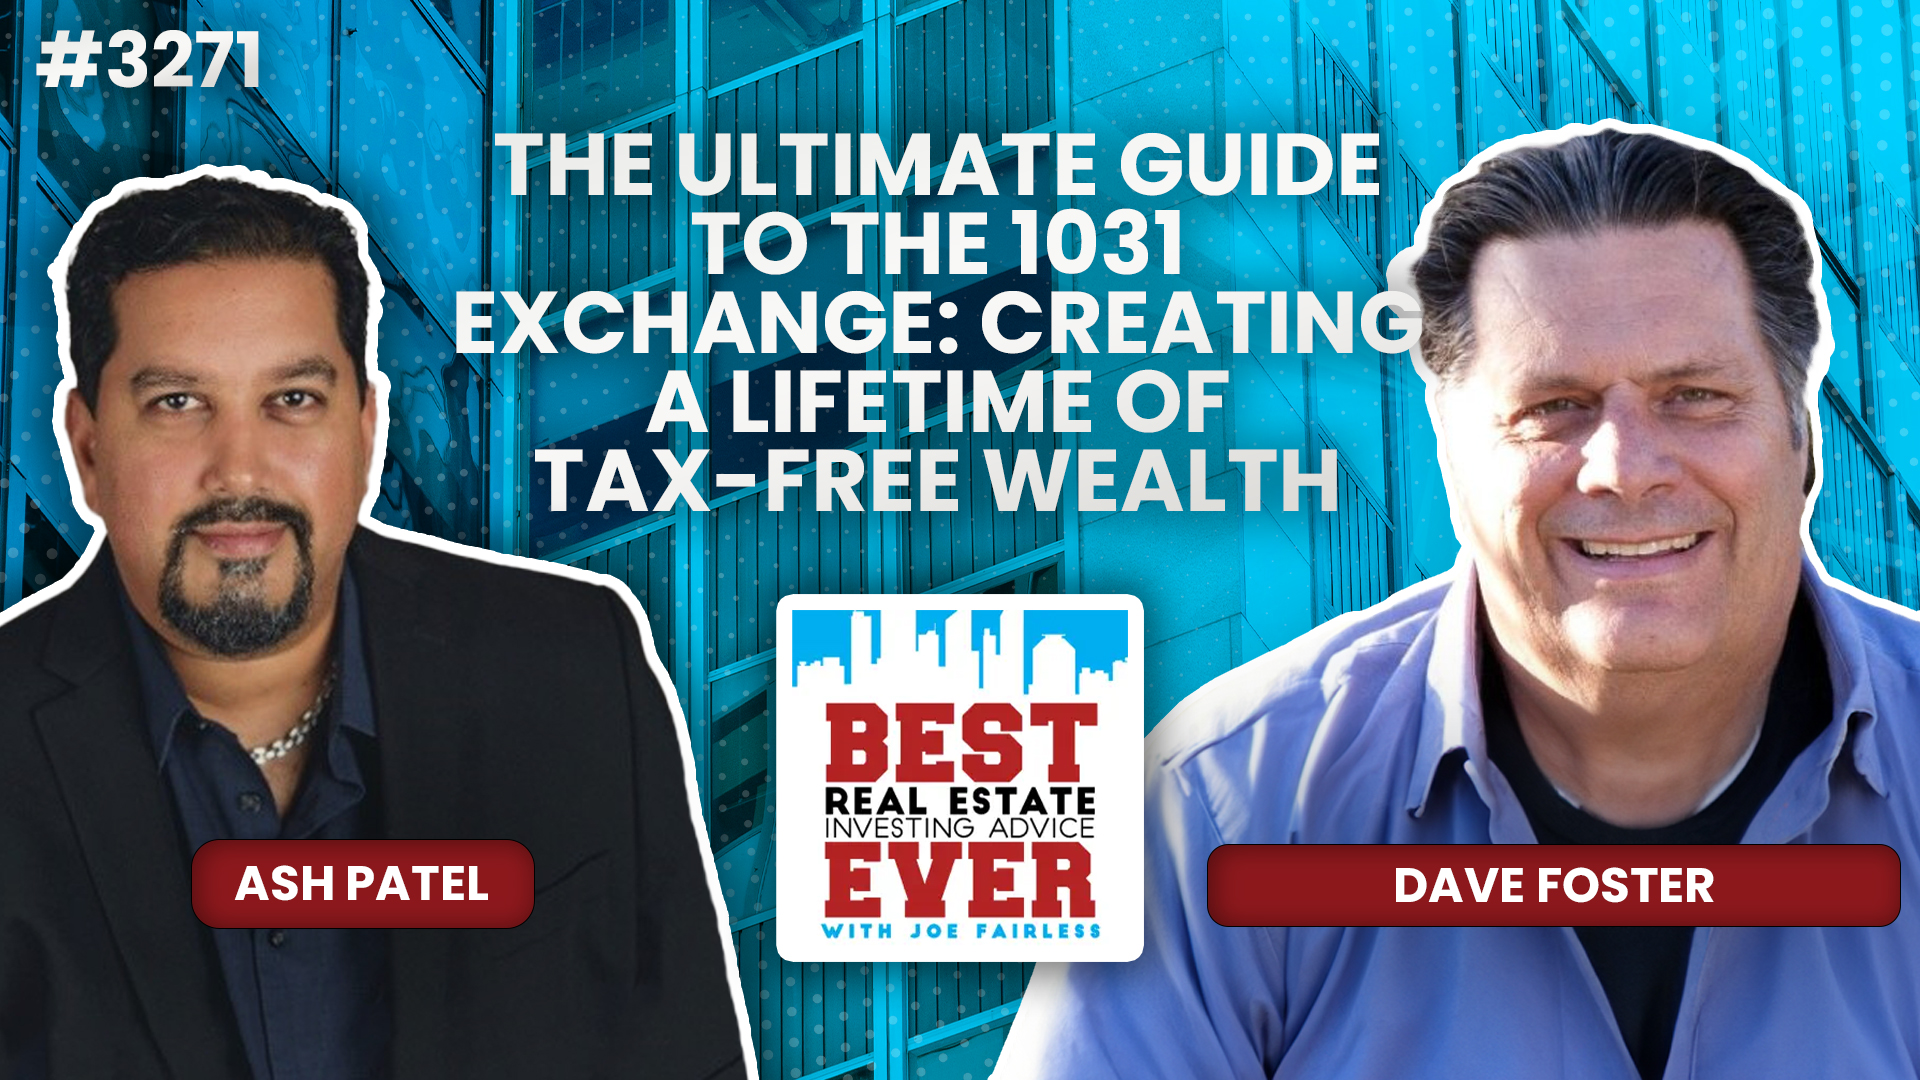 JF3271: Dave Foster — The Ultimate Guide to the 1031 Exchange: Creating a Lifetime of Tax-Free Wealth